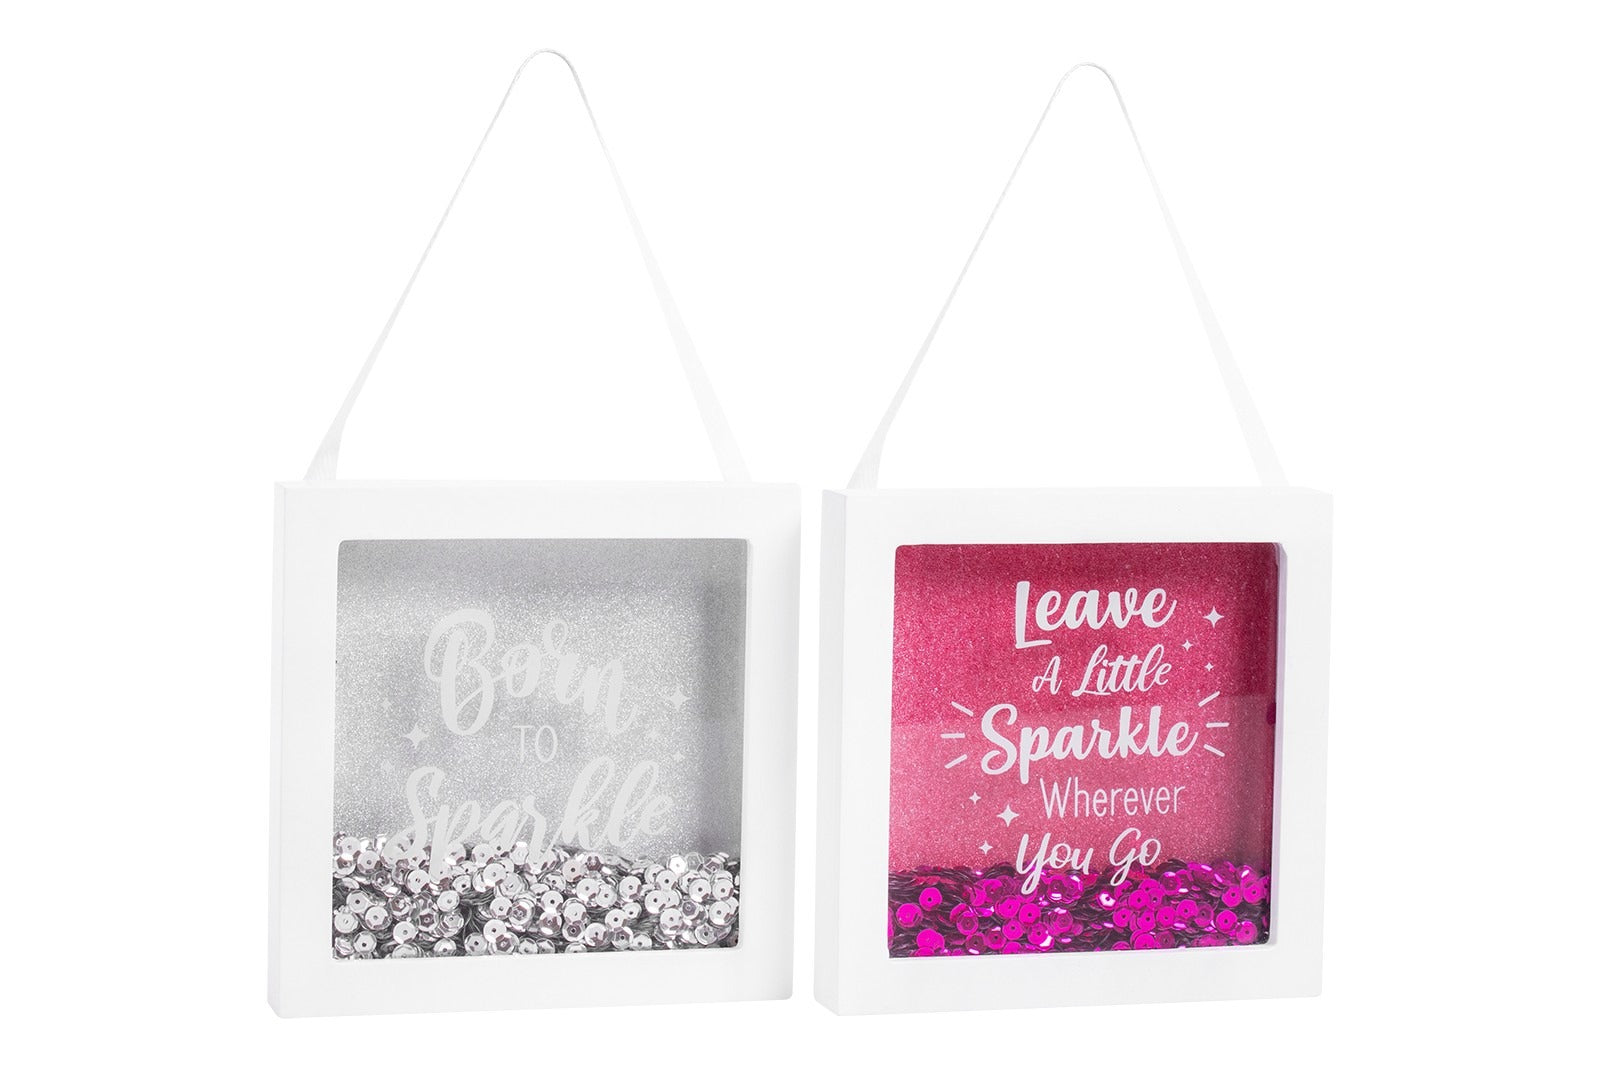 View Quote Glitter Box Frame 2 Assorted information